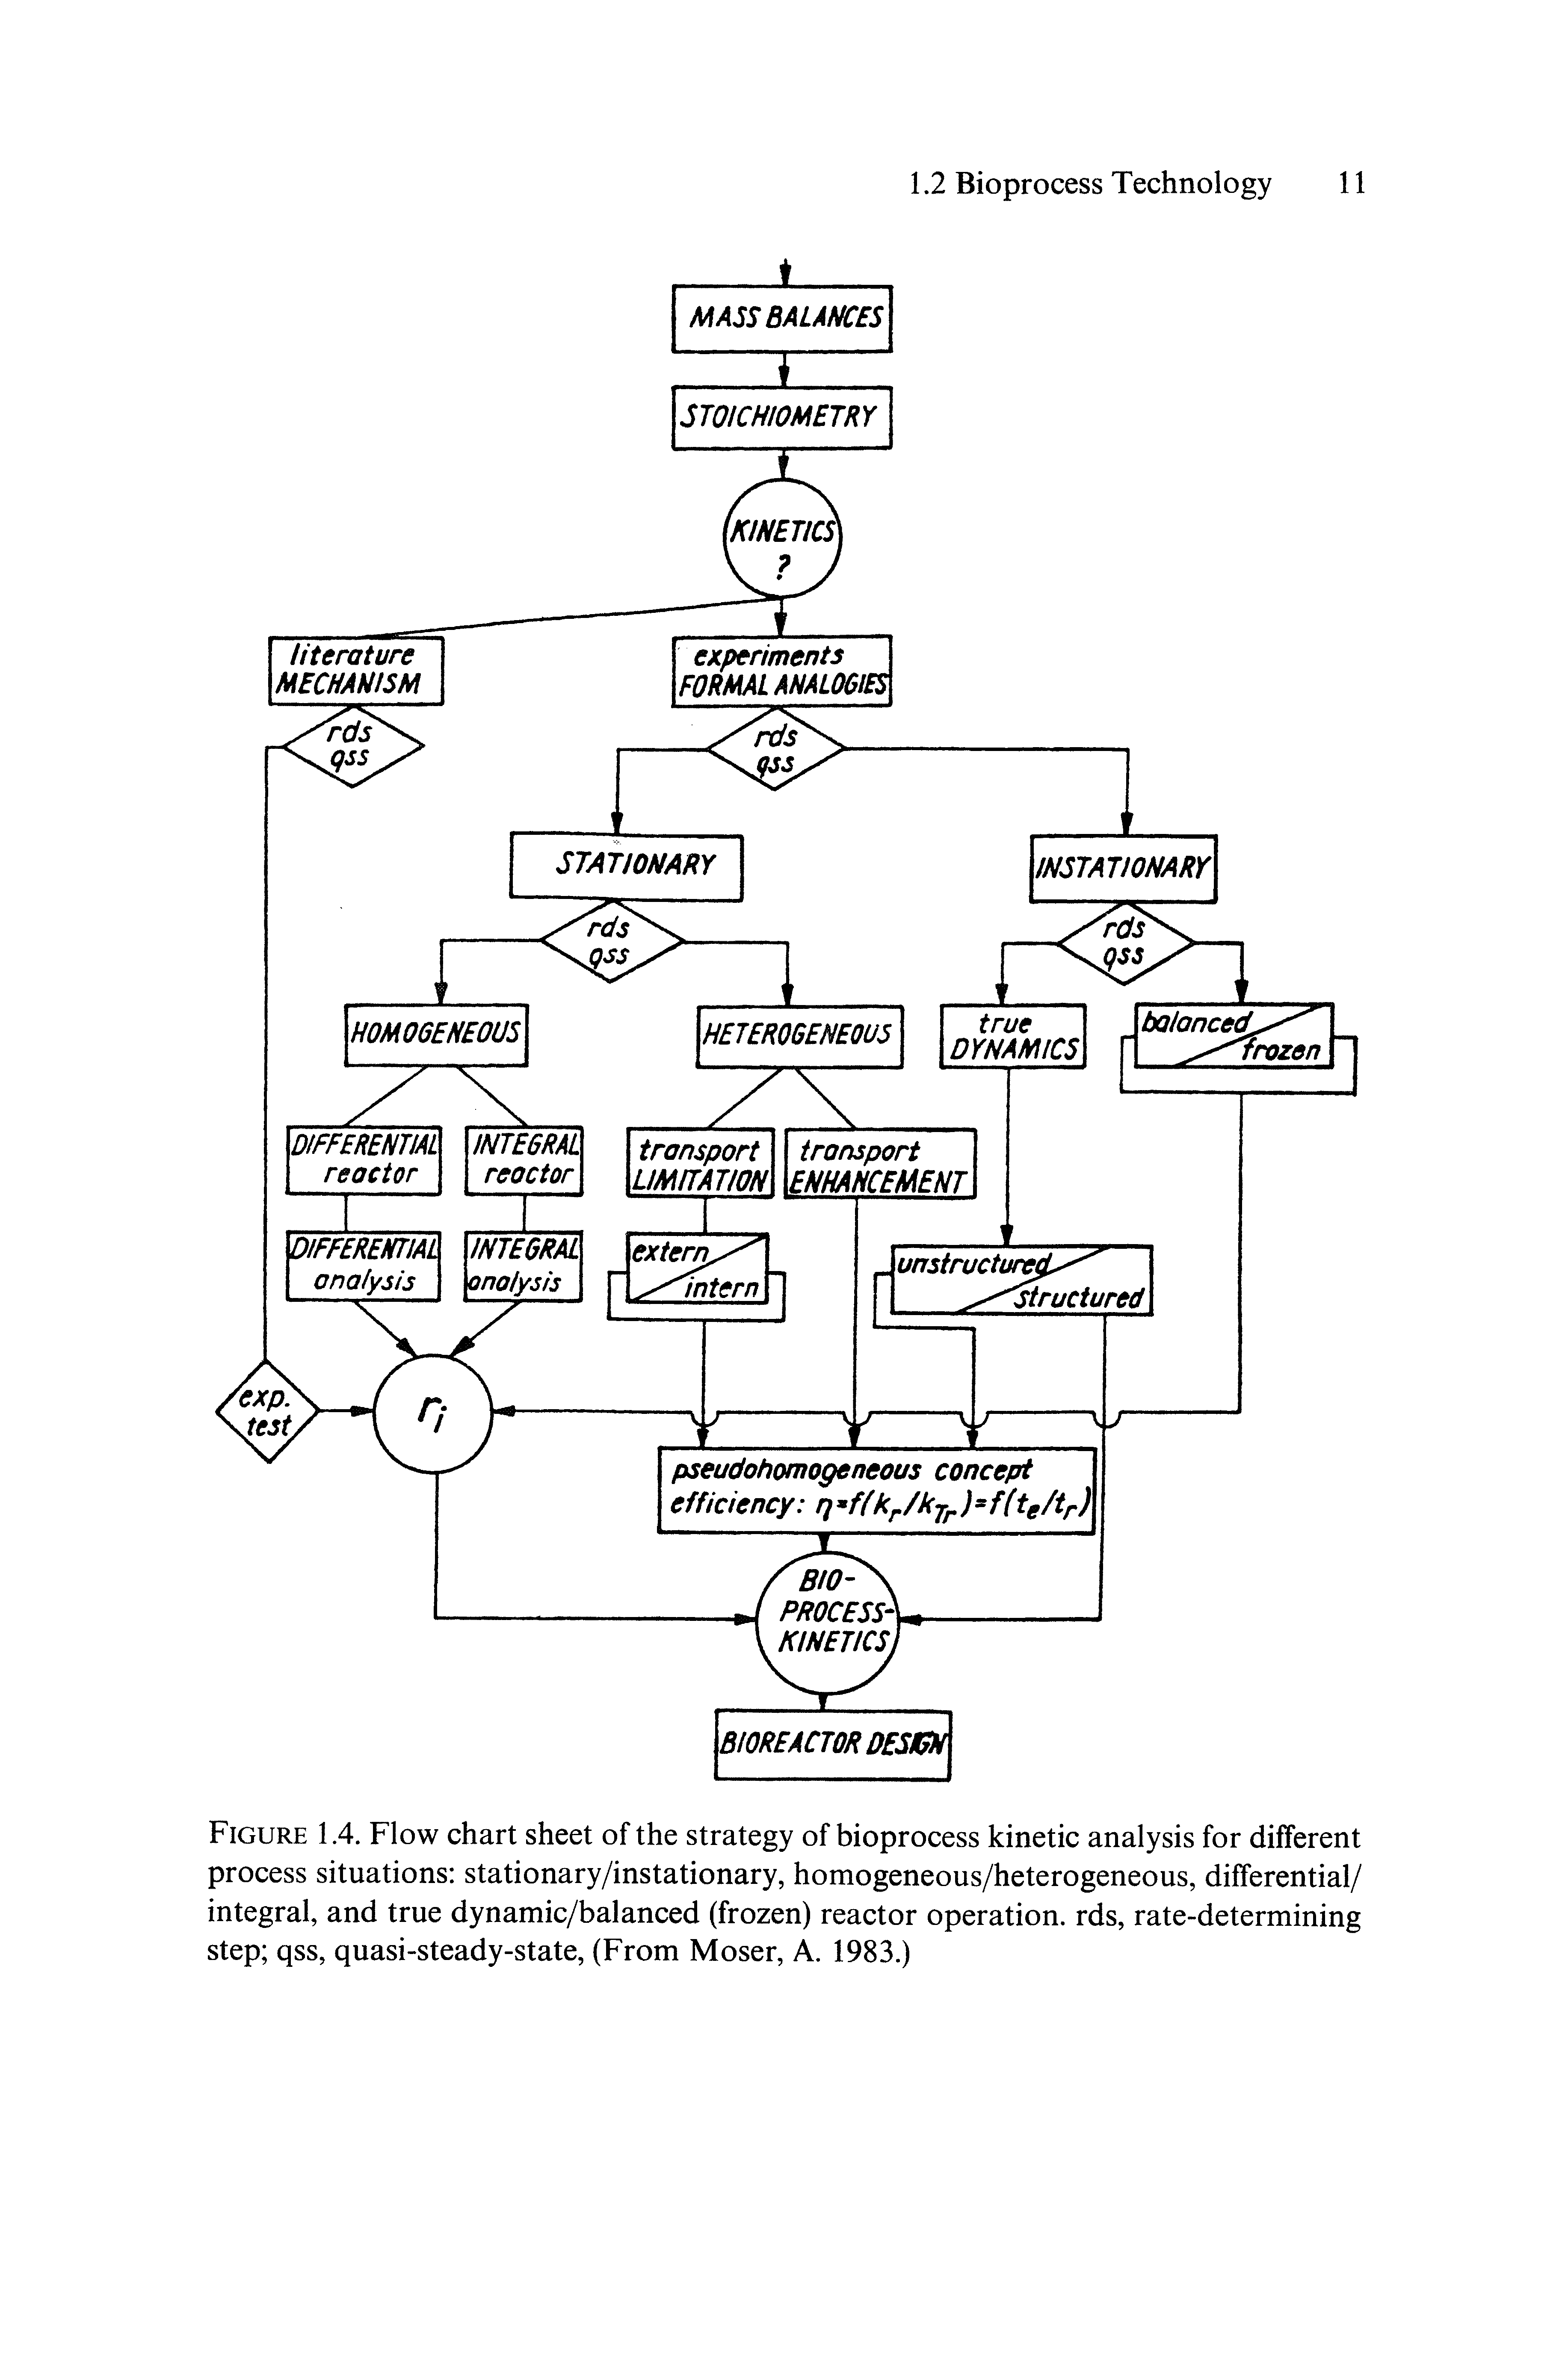 Figure 1.4. Flow chart sheet of the strategy of bioprocess kinetic analysis for different process situations stationary/instationary, homogeneous/heterogeneous, differential/ integral, and true dynamic/balanced (frozen) reactor operation, rds, rate-determining step qss, quasi-steady-state, (From Moser, A. 1983.)...